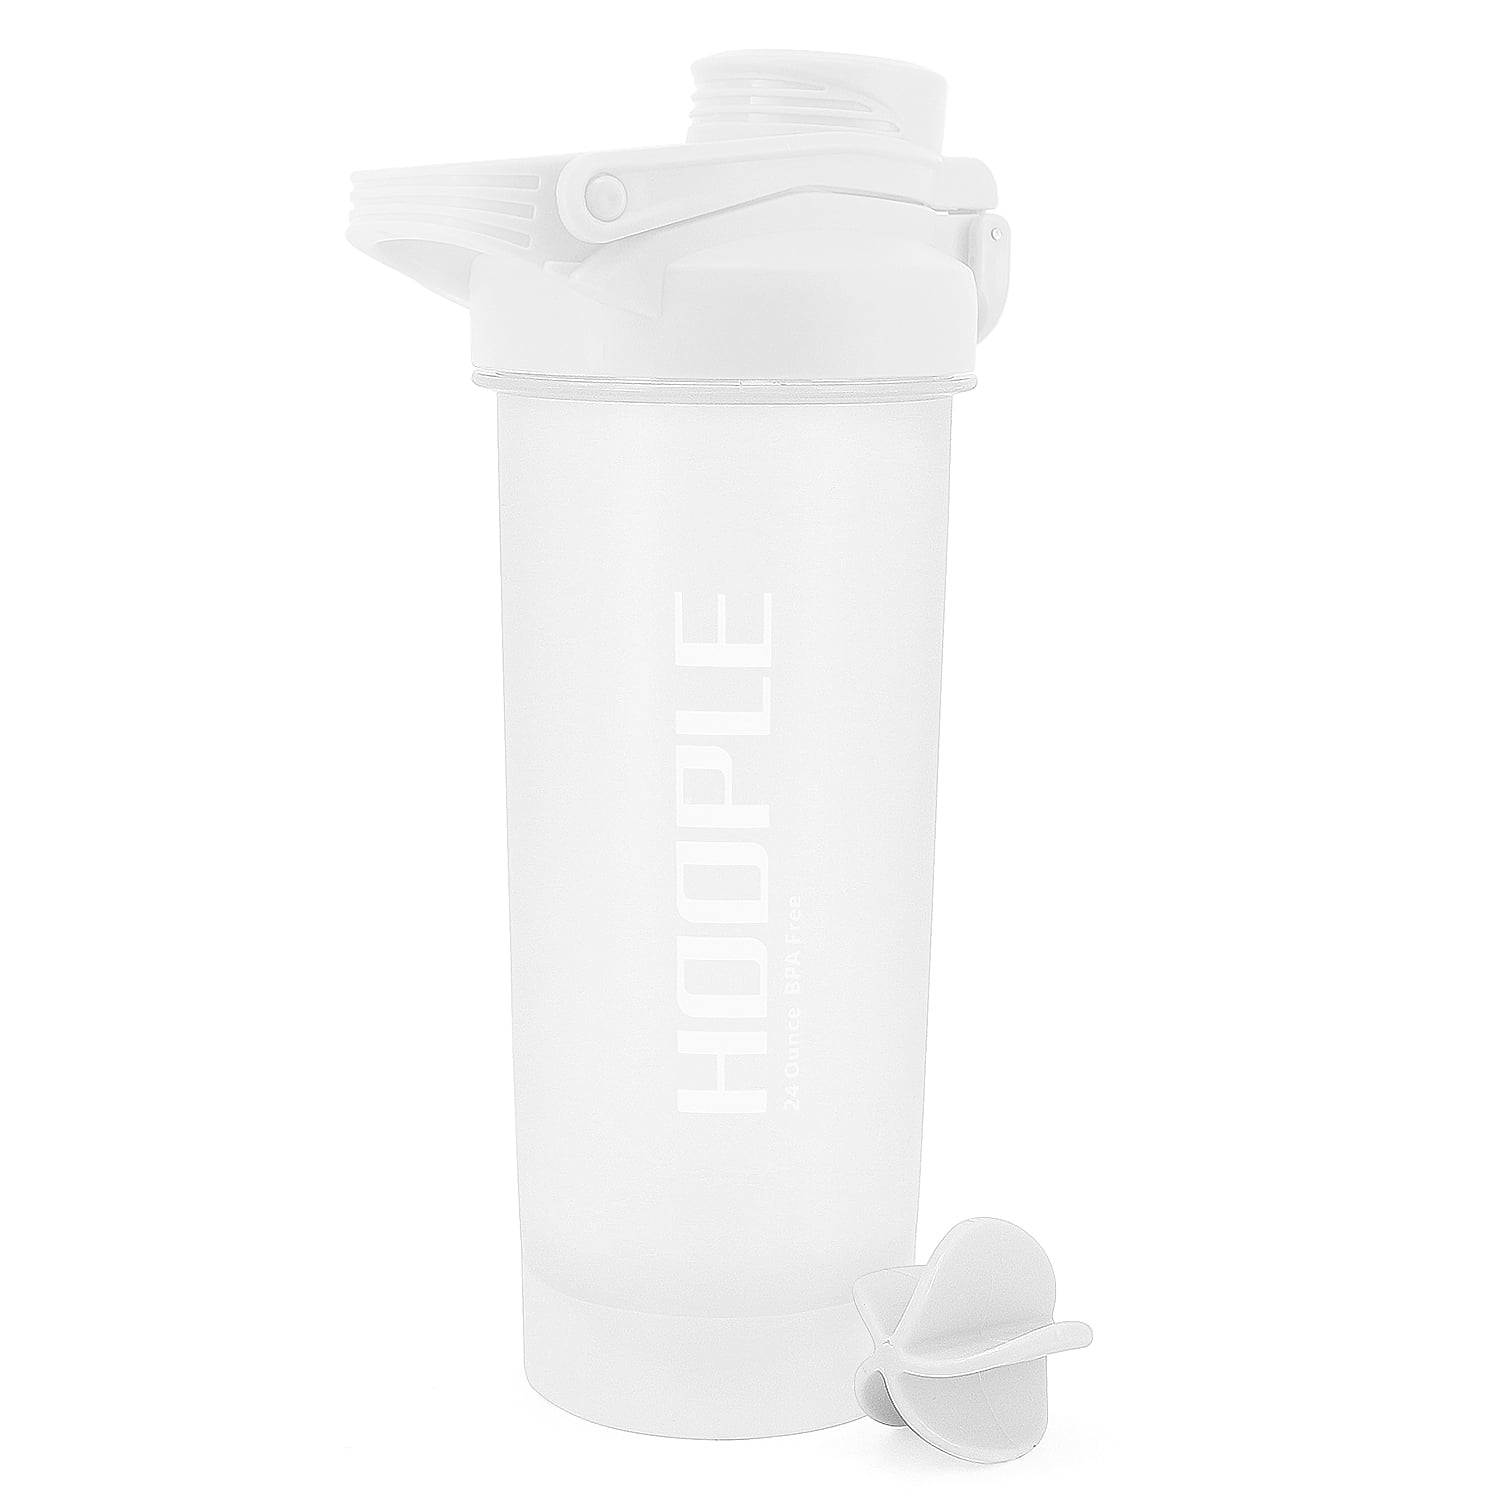 Hoople 24 OZ Shaker Bottle Protein Powder Shake Blender Gym Smoothie Cup,  BPA Free, Auto-Flip Leak-Proof Lid, Handle with Ball Included - Green –  TOPOKO